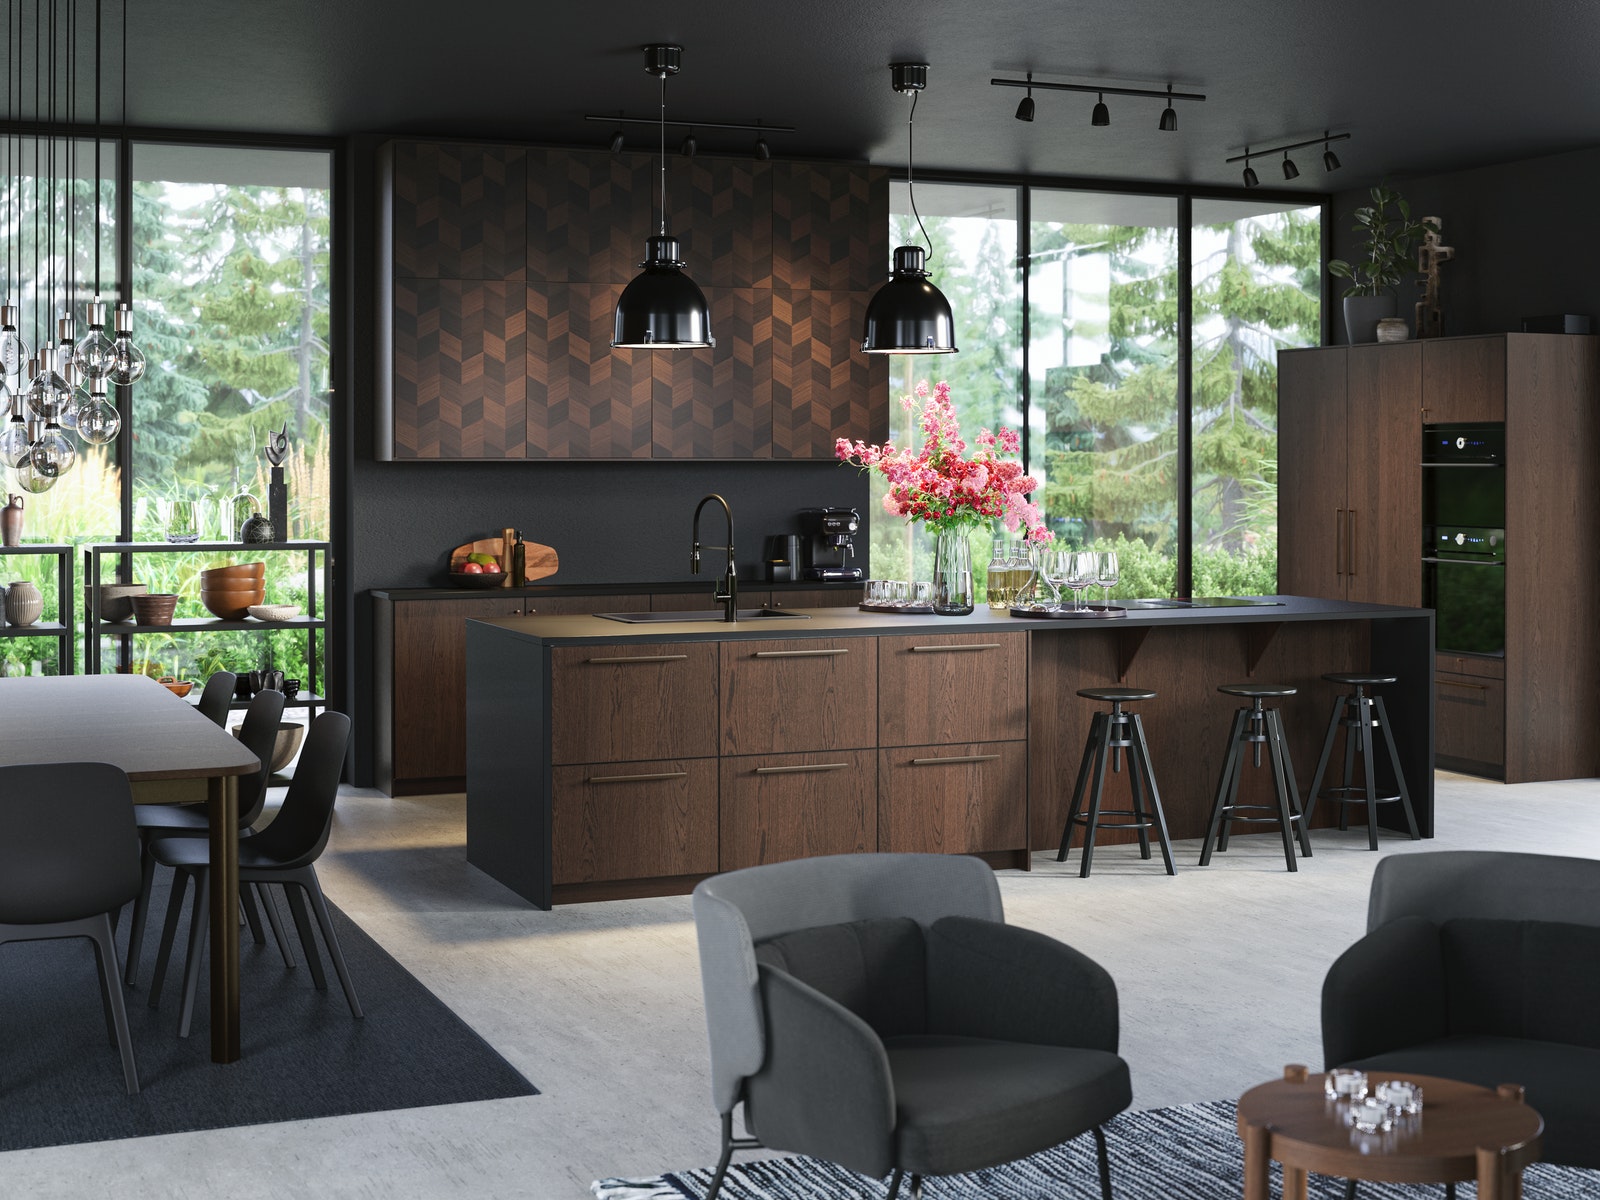 IKEA - A sleek and modern kitchen for memorable gatherings